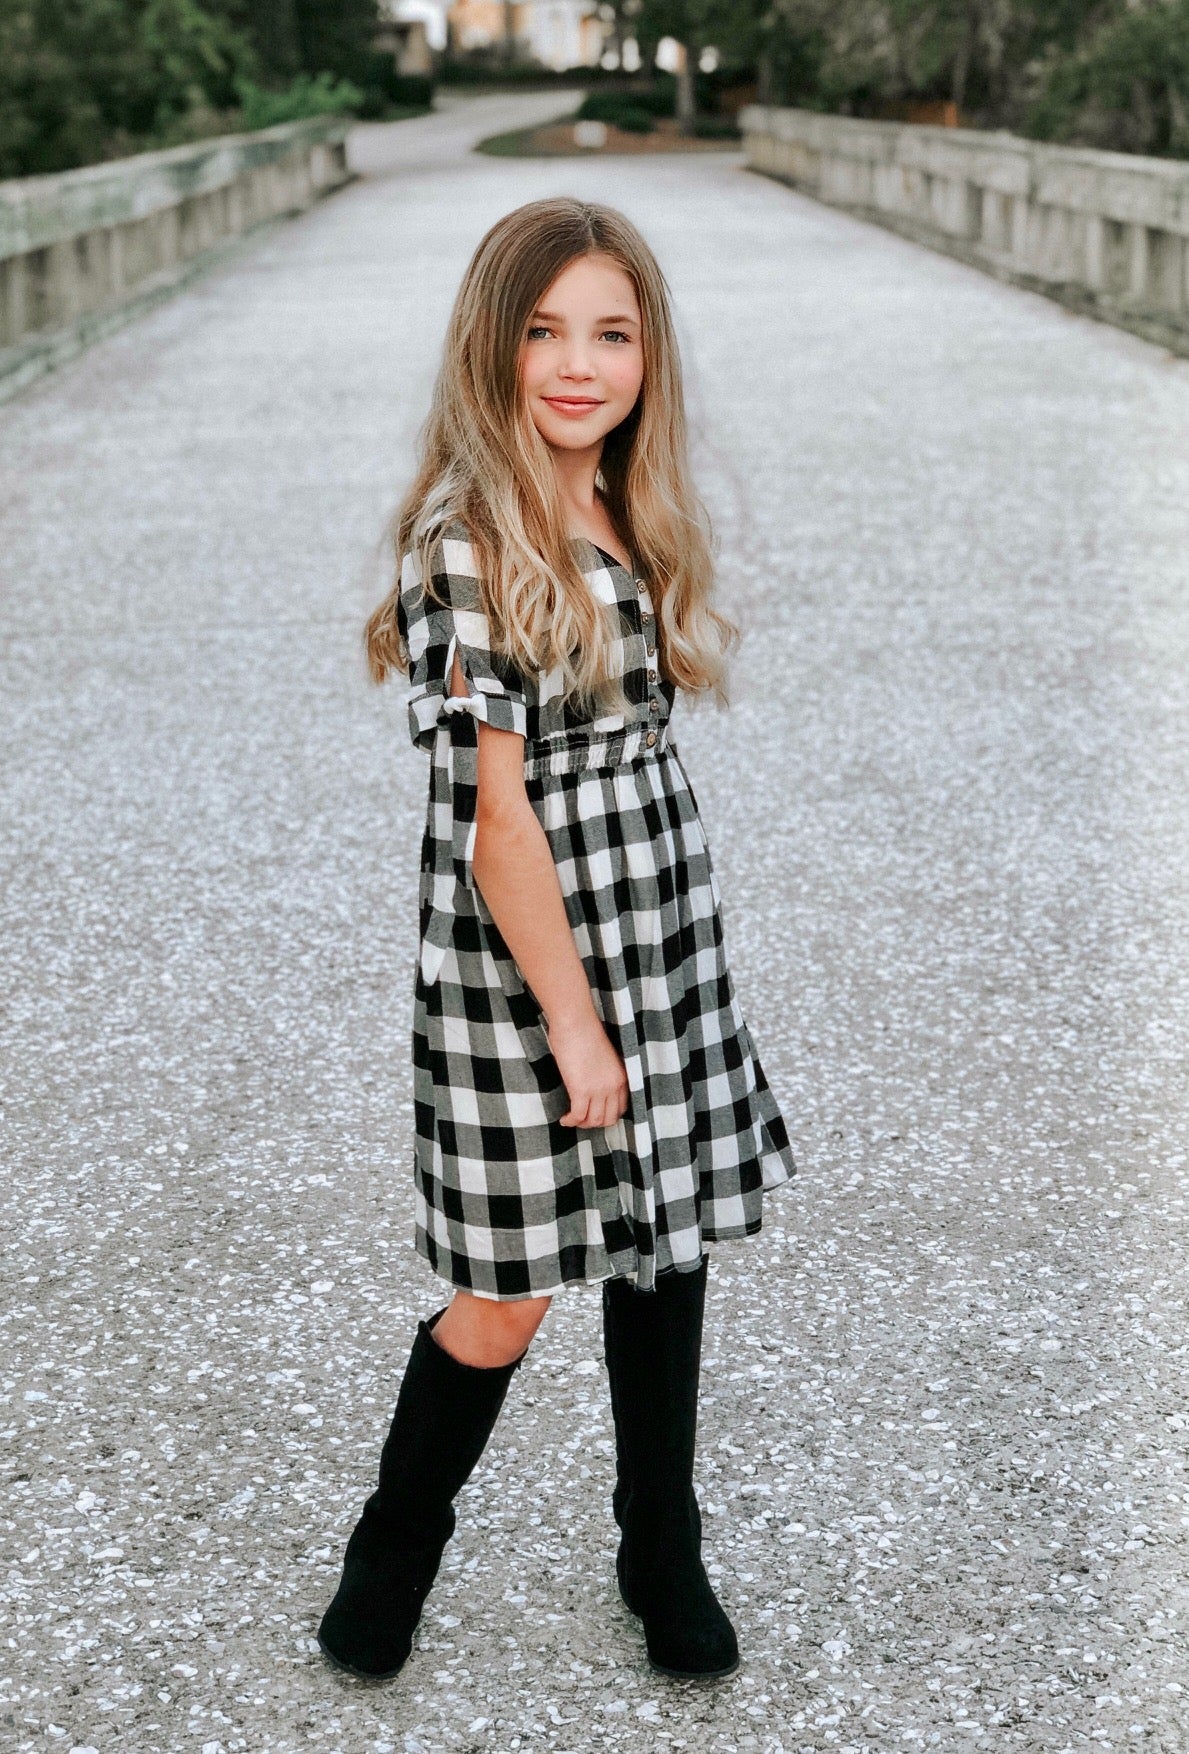 black and white dresses for tweens